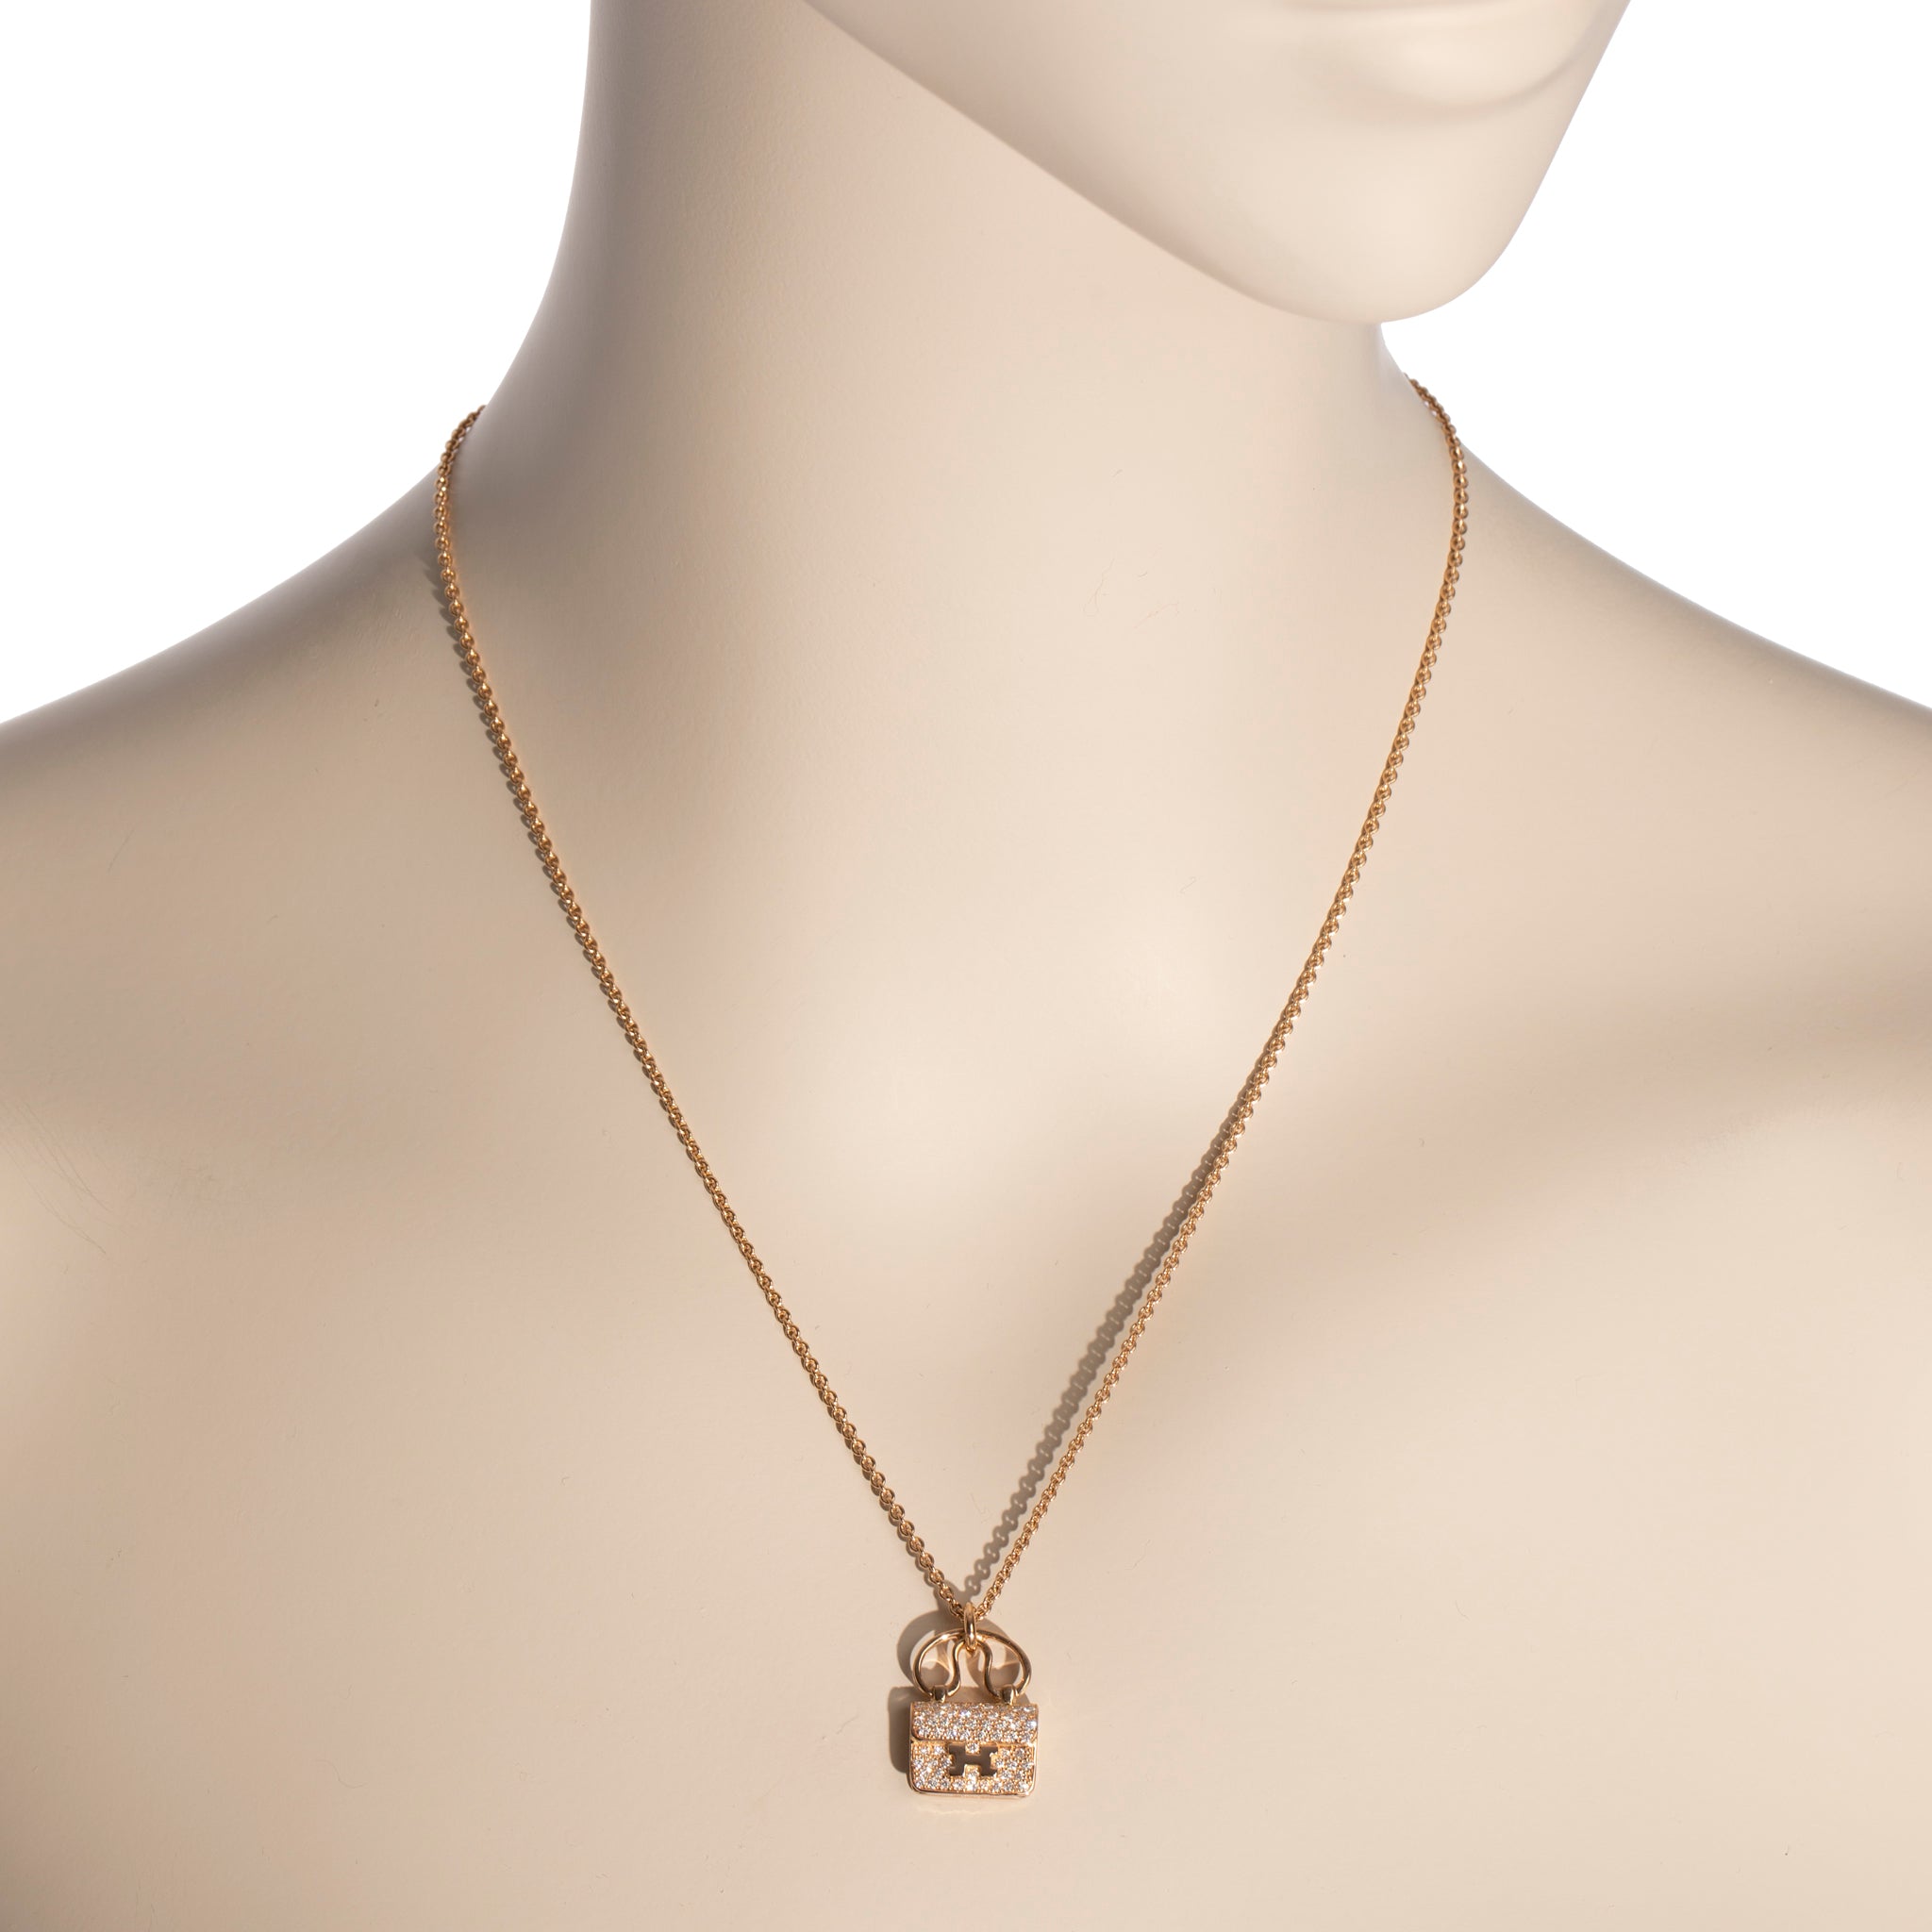 Hermes Constance Rose Gold Necklace With Diamonds